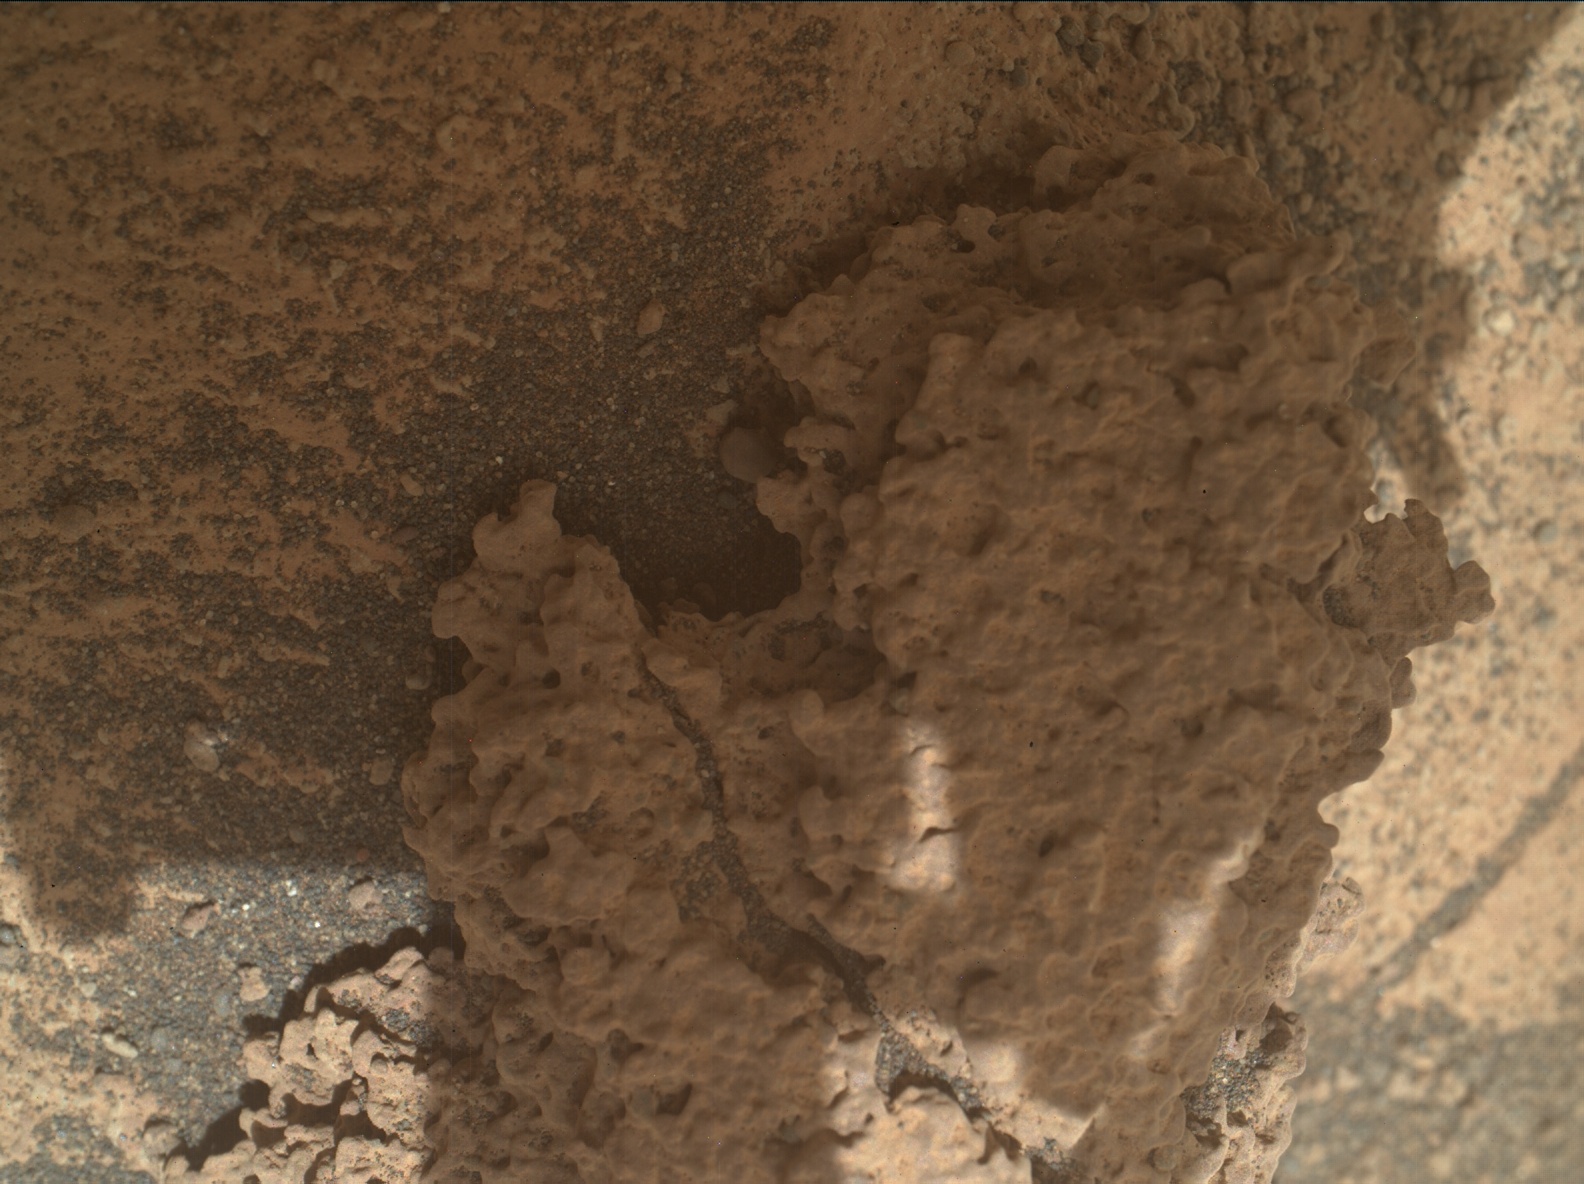 Nasa's Mars rover Curiosity acquired this image using its Mars Hand Lens Imager (MAHLI) on Sol 3571